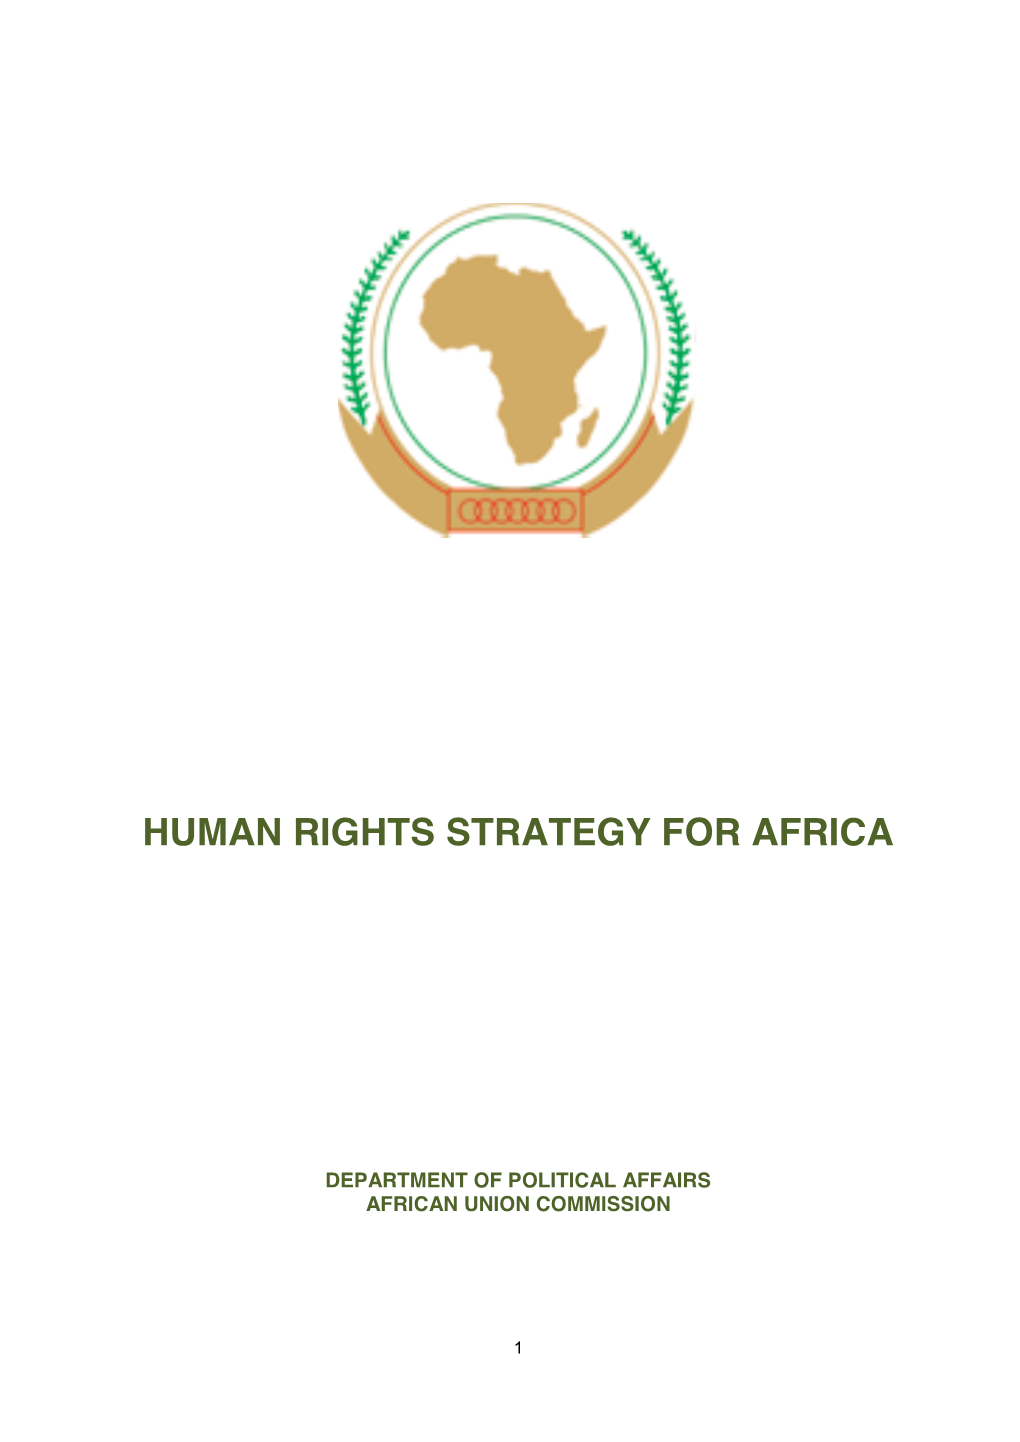 Human Rights Strategy for Africa